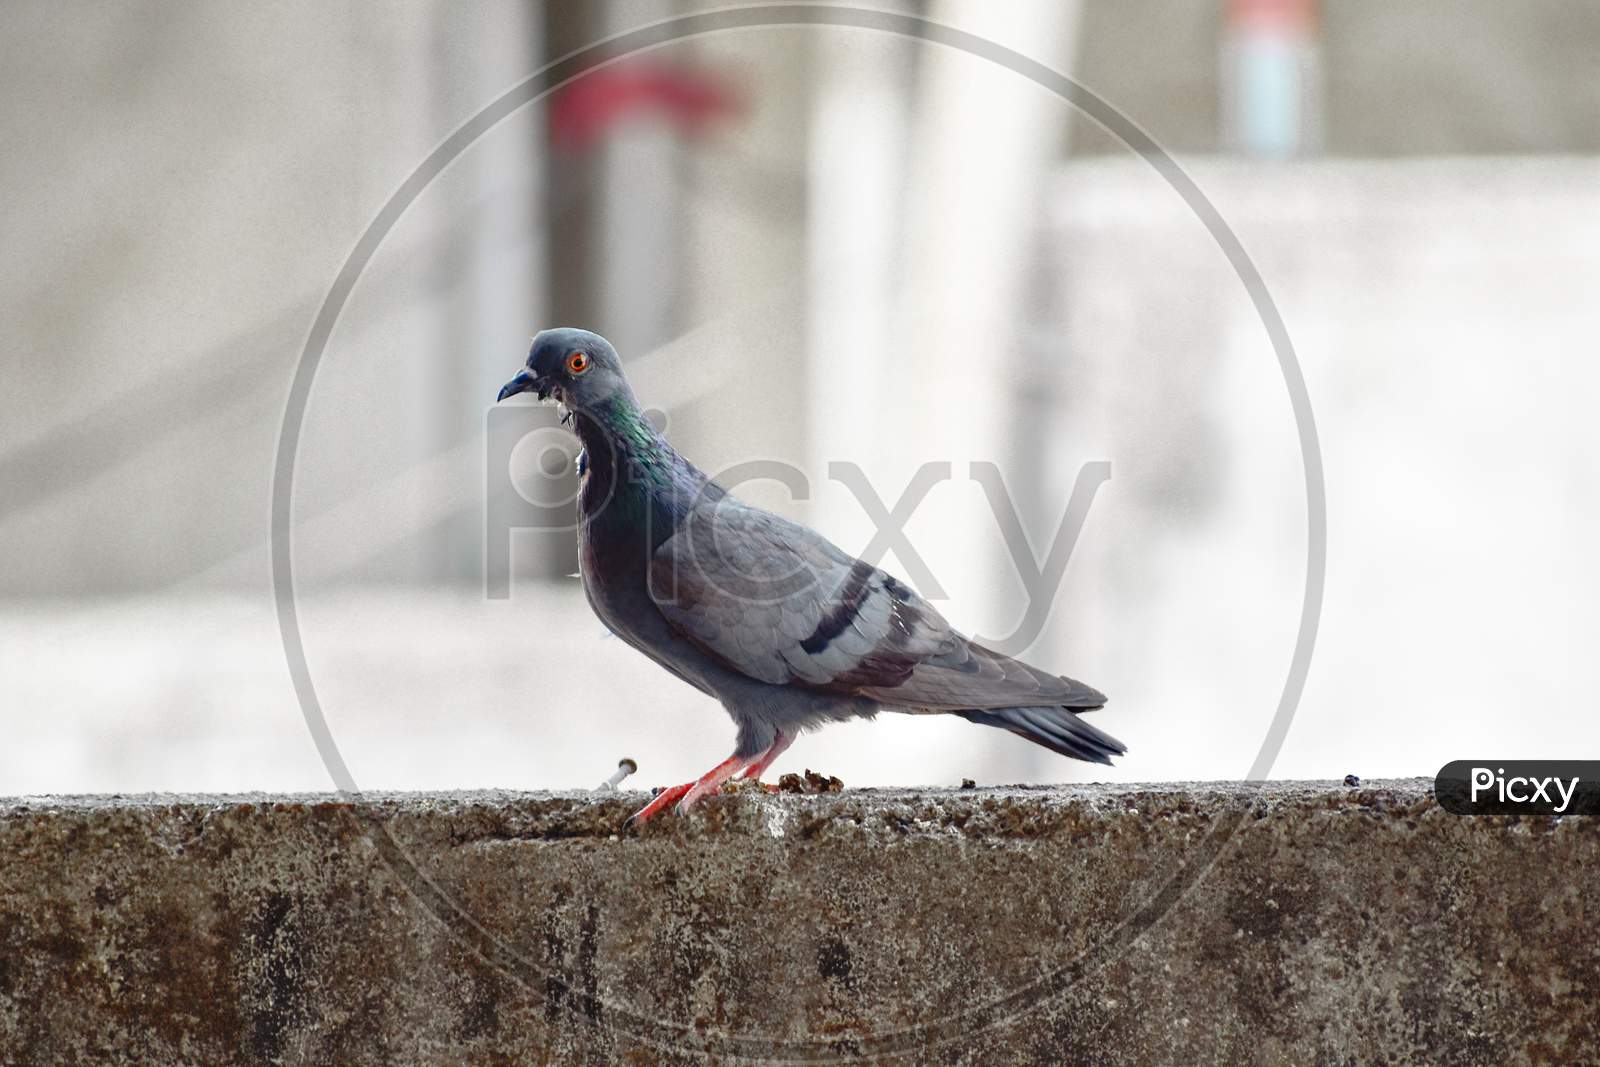 Pigeon seen rarely on a terrace during quarantine days. Selectively focused